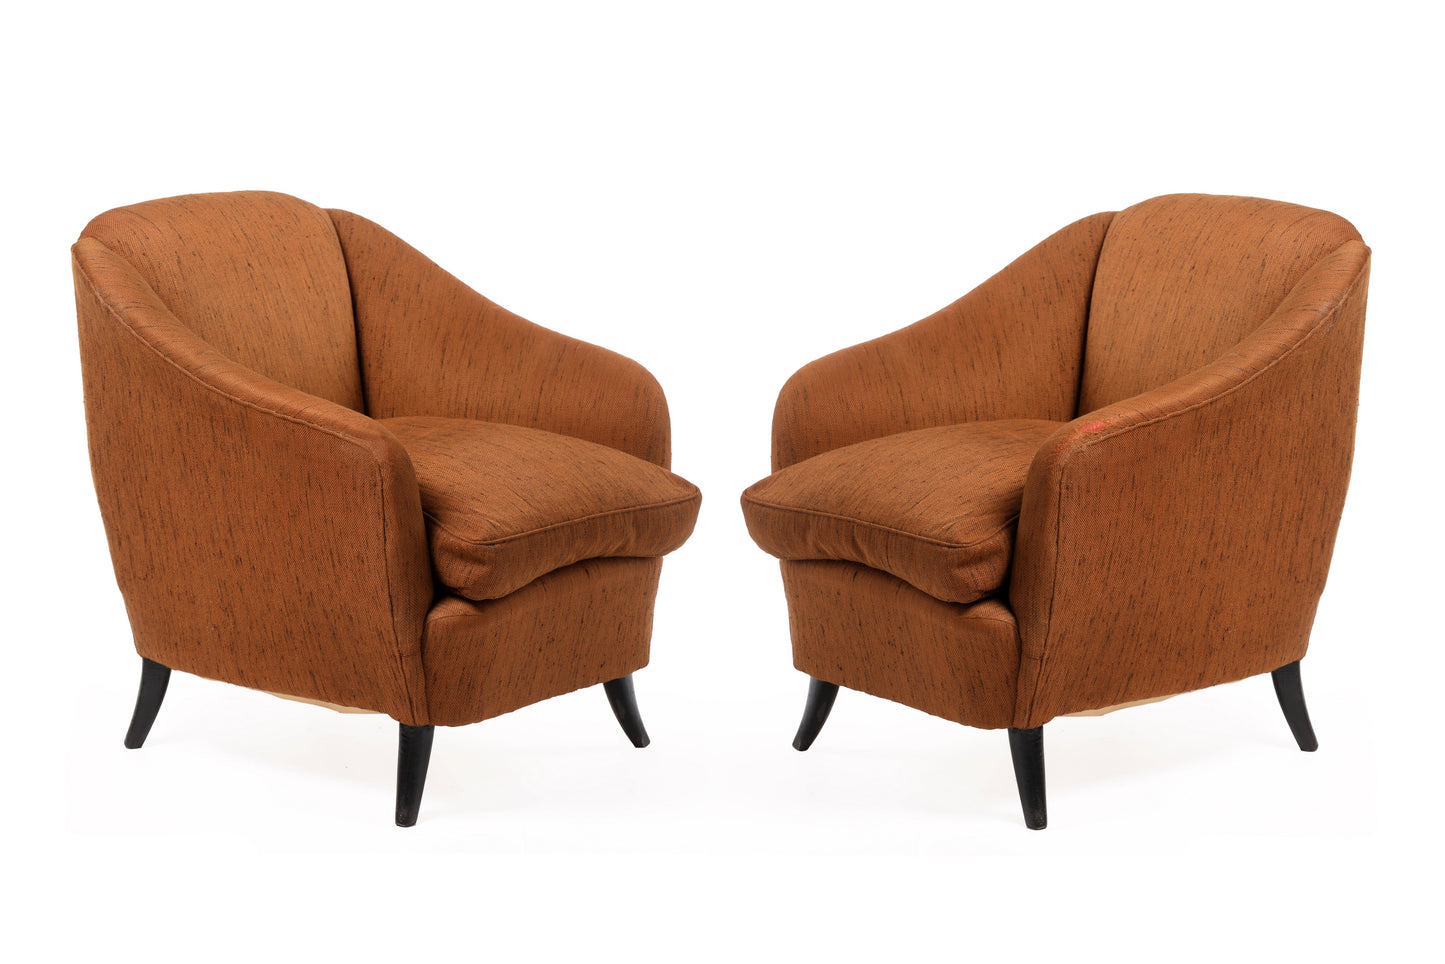 Pair of Gio Ponti armchairs for home and garden from the 1940s